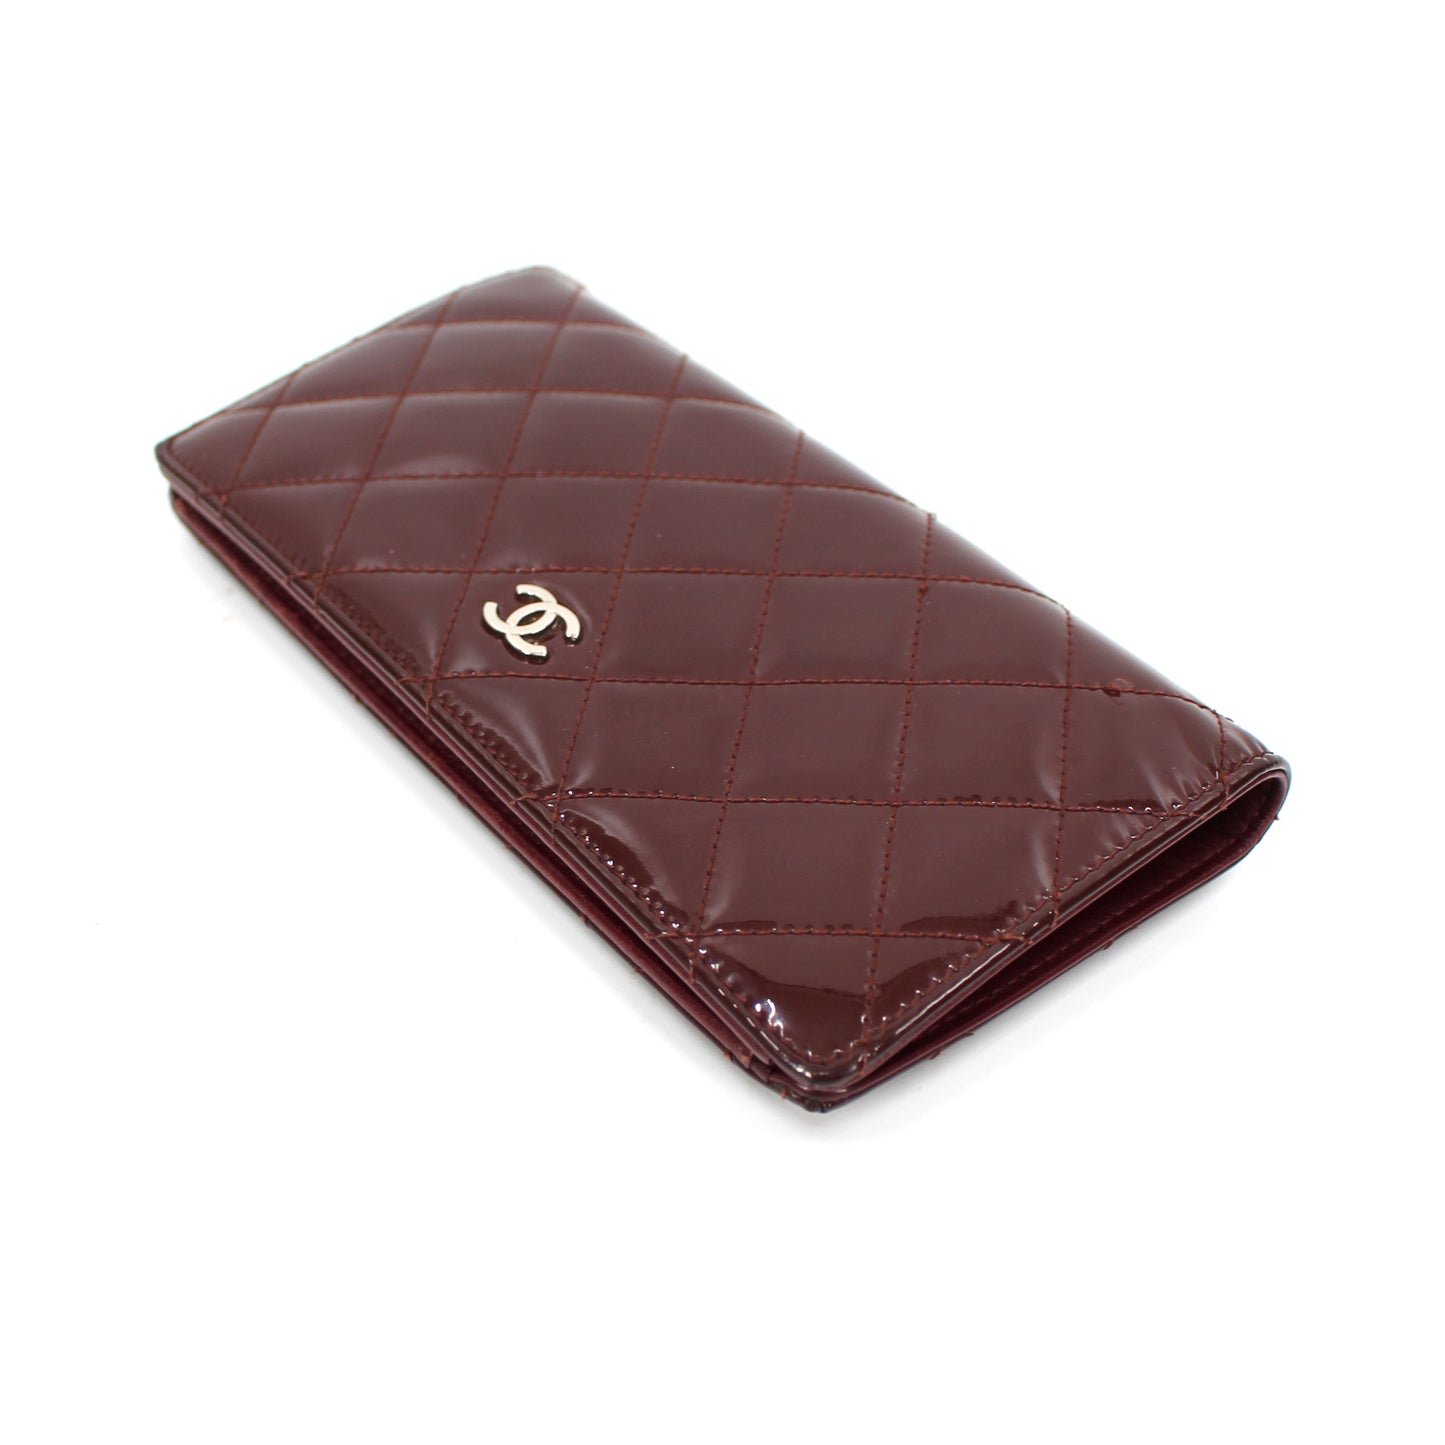 Chanel Quilted Patent Leather Wallet